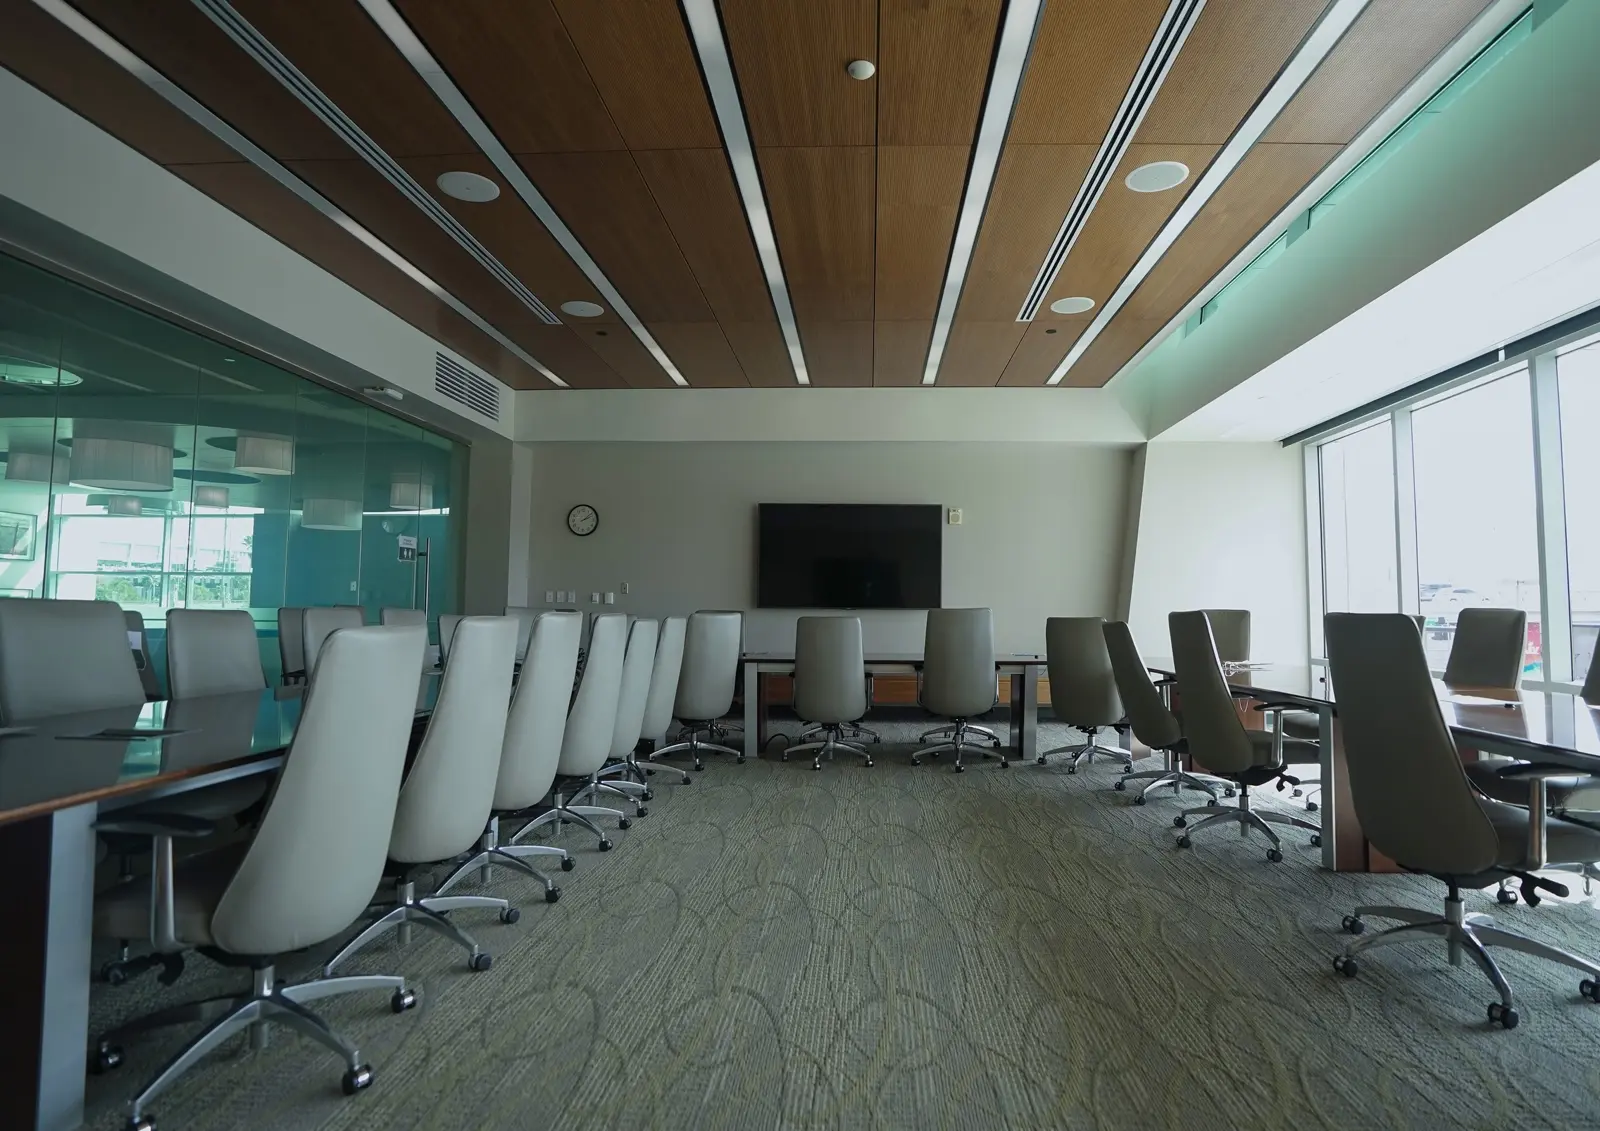 CAMLS A modern conference room with a large table surrounded by several high-backed office chairs. The room has a wooden ceiling with recessed lighting, a flat-screen TV on the wall, glass walls on one side, and large windows allowing natural light to fill the space.